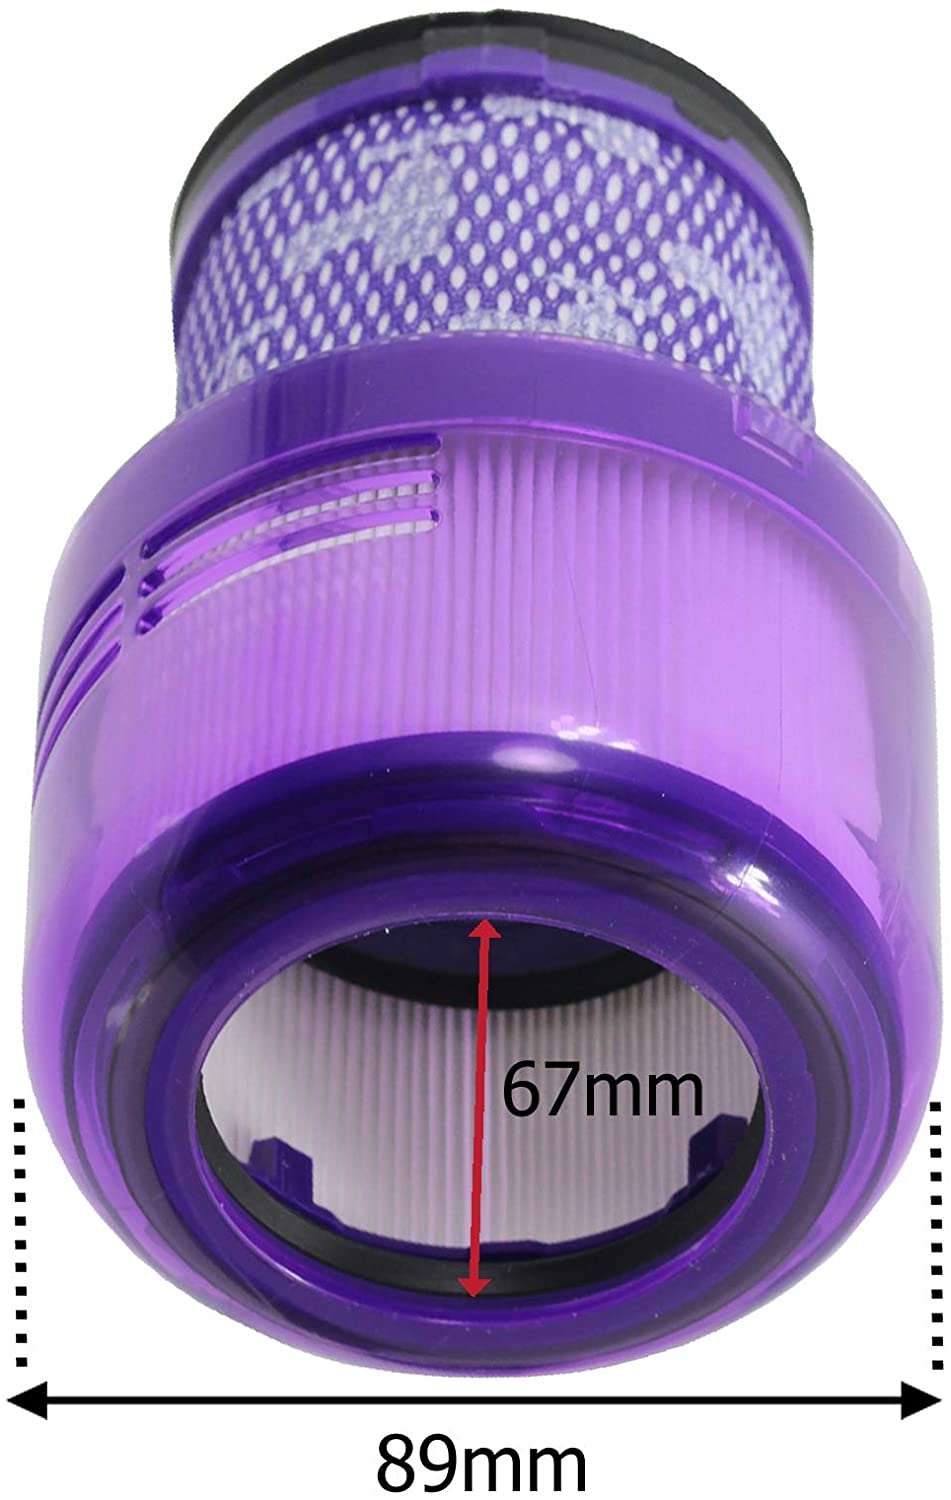 Filter for Dyson V11 SV14 Cyclone Cordless Vacuum Cleaner Washable Purple